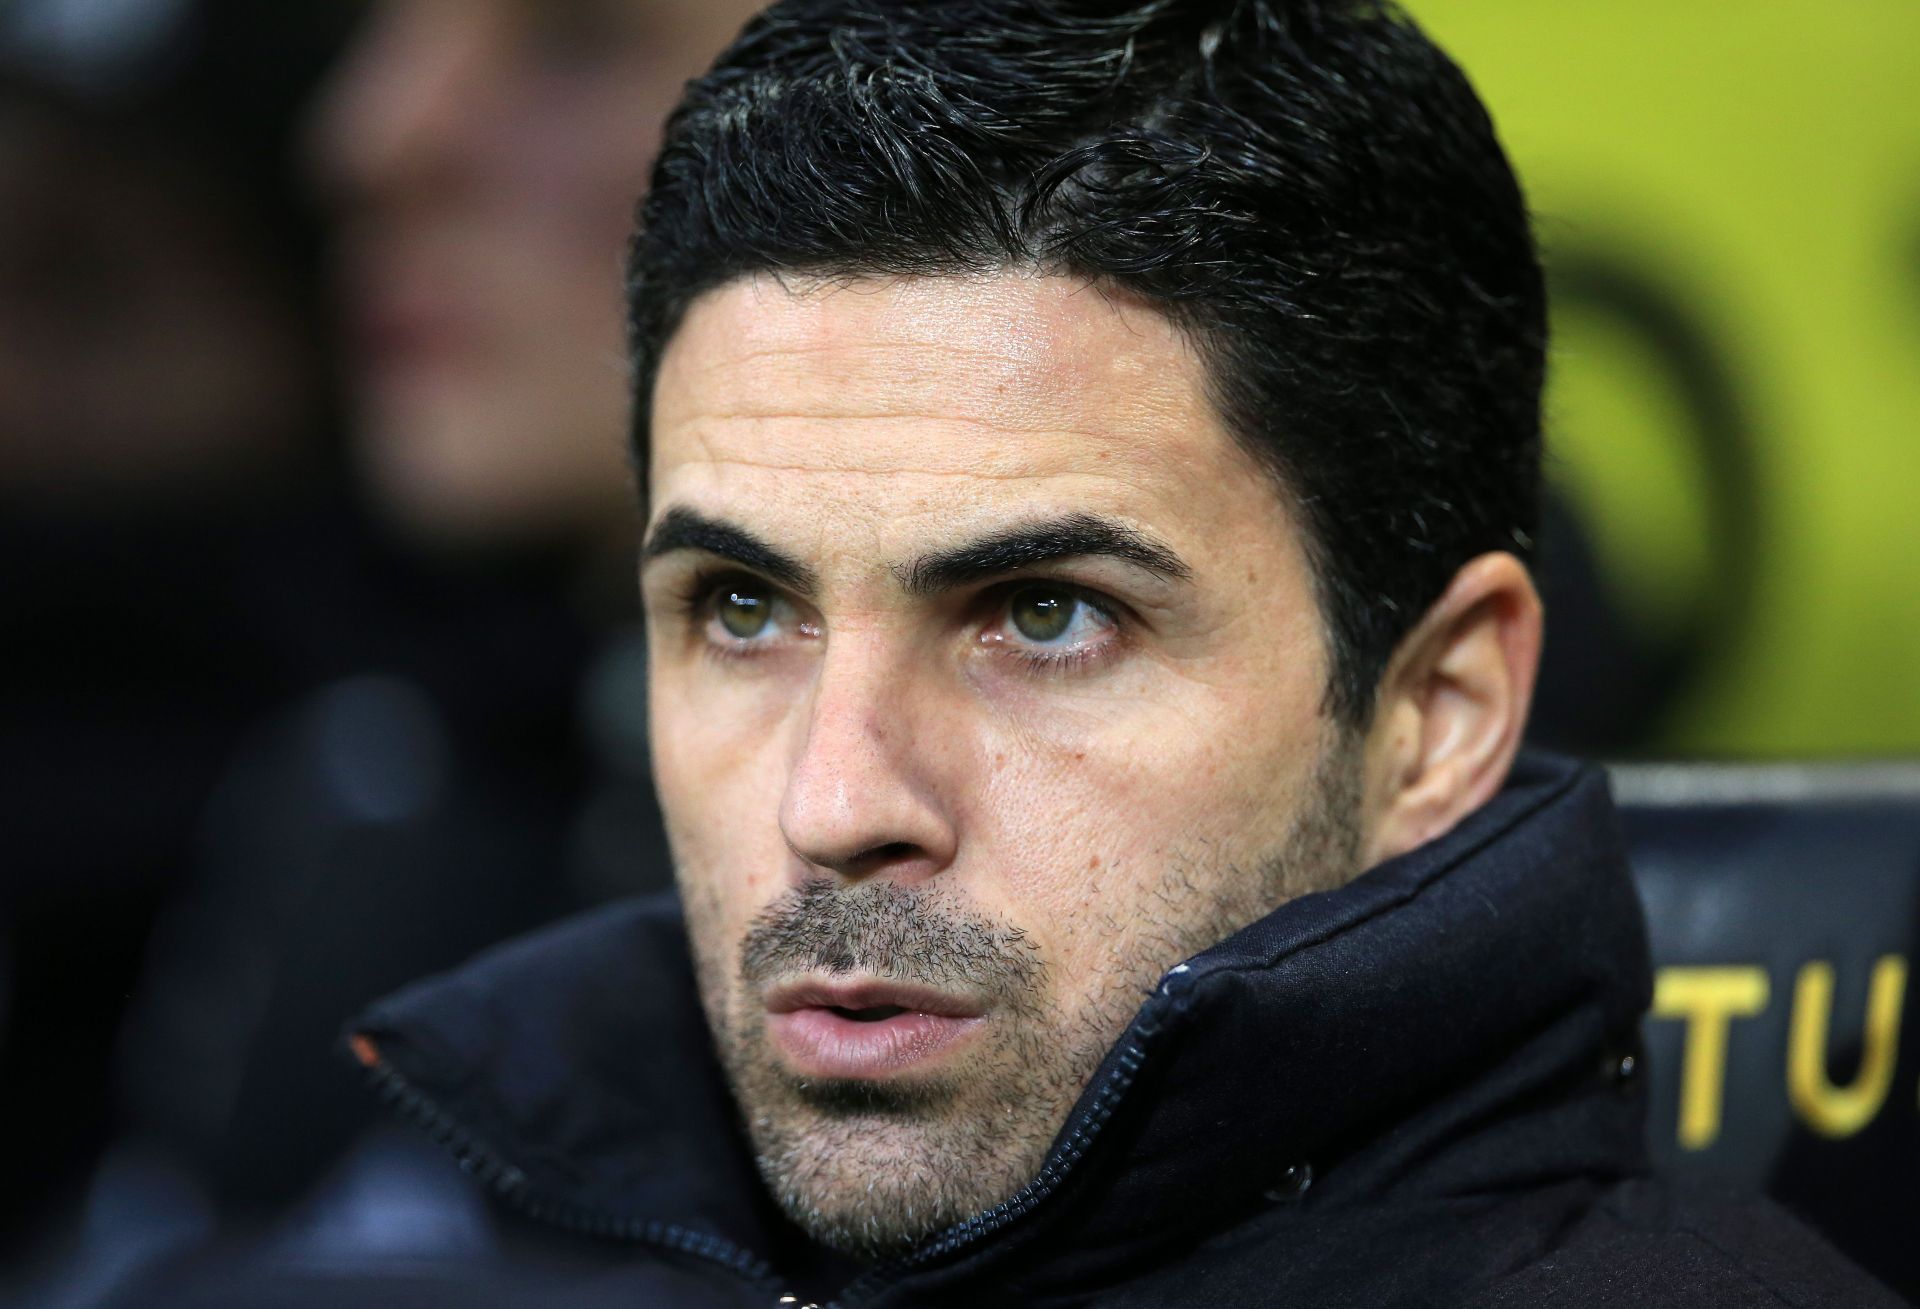 Arsenal manager Mikel Arteta has won four games in a row in the Premier League.